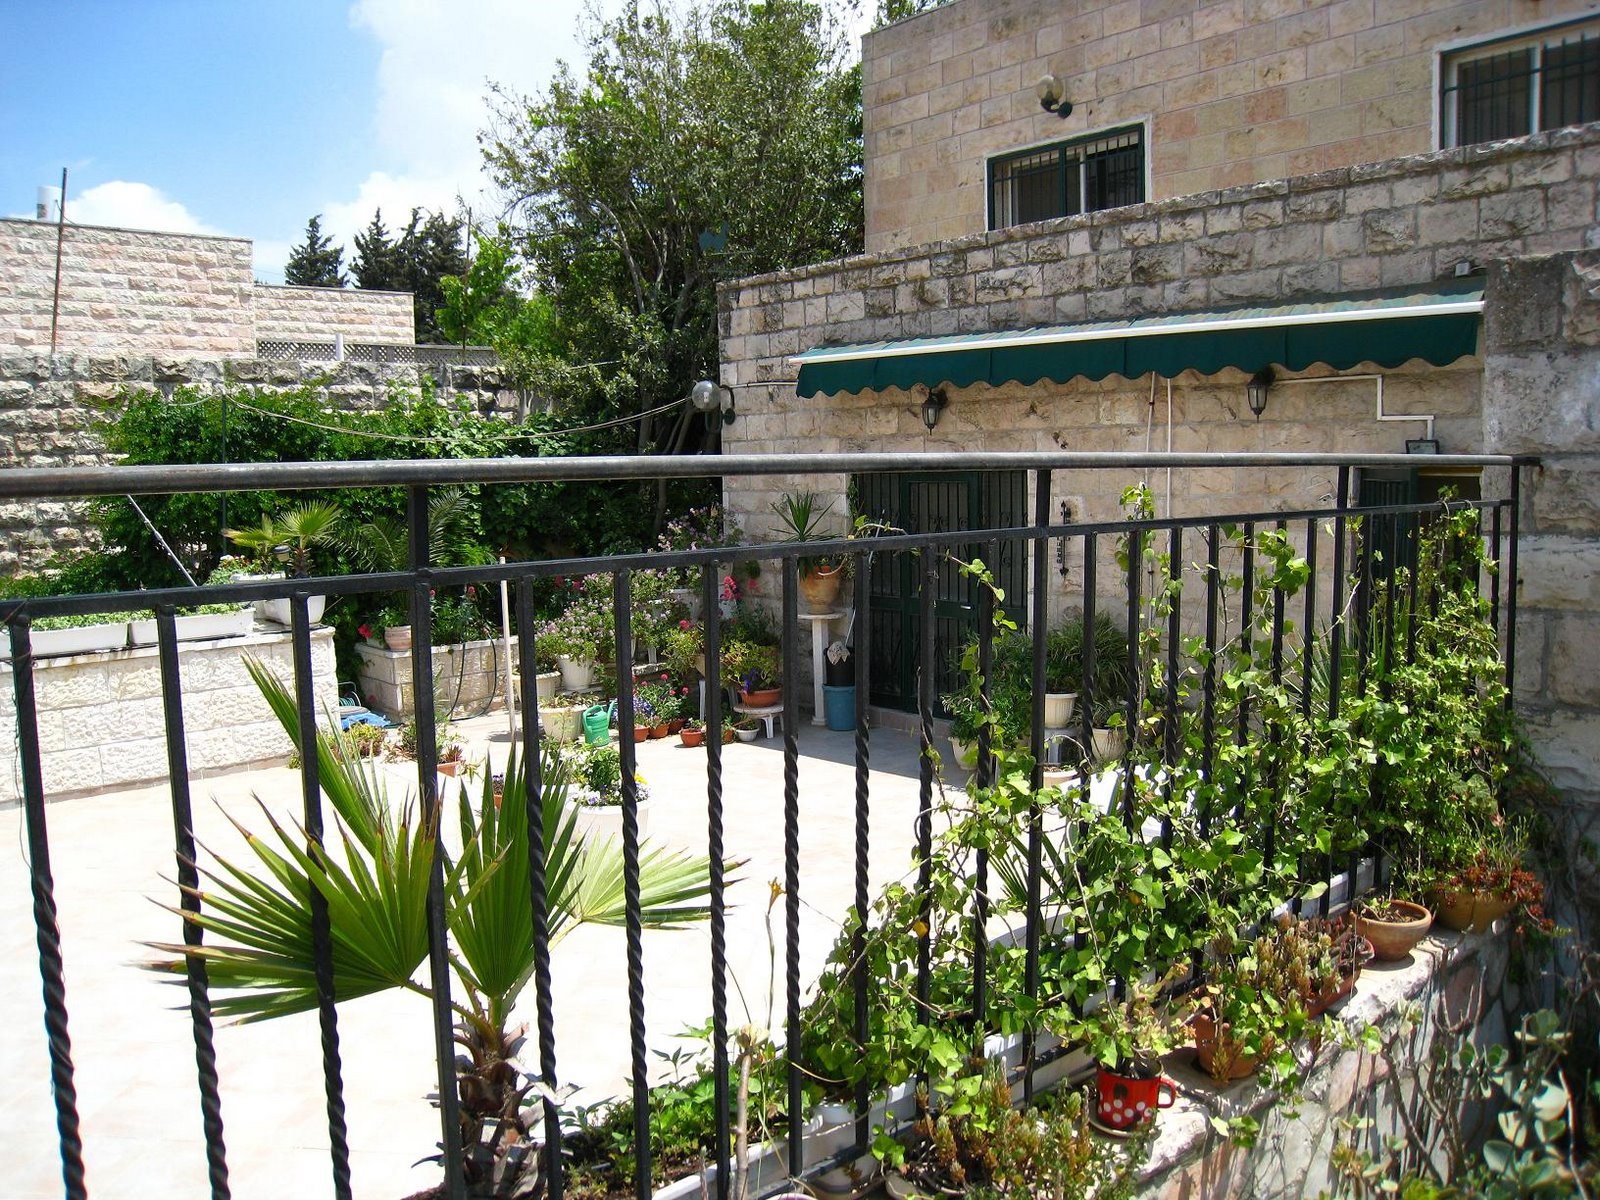 [The+patio+at+our+old+home+in+Jerusalem.JPG]